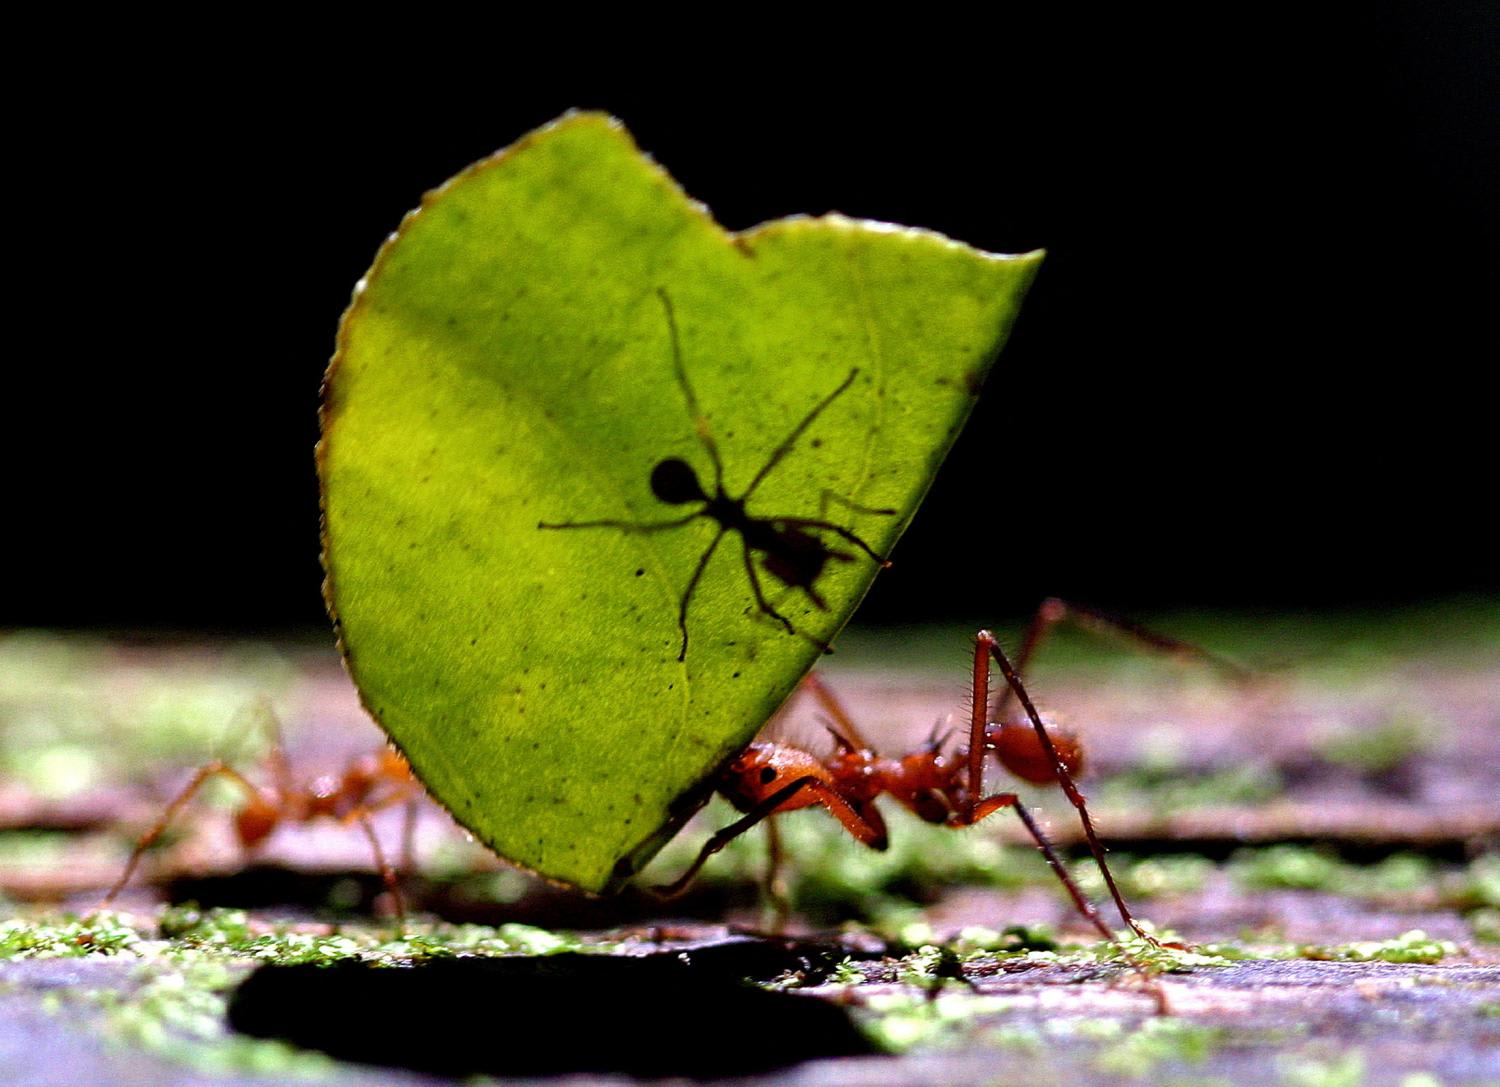  A leaf-cutting ant (Atta cephalotes) carries a leaf with another ant at La Selva biological station in Sarapiqui, Costa Rica on Janu 12, 2006. 

